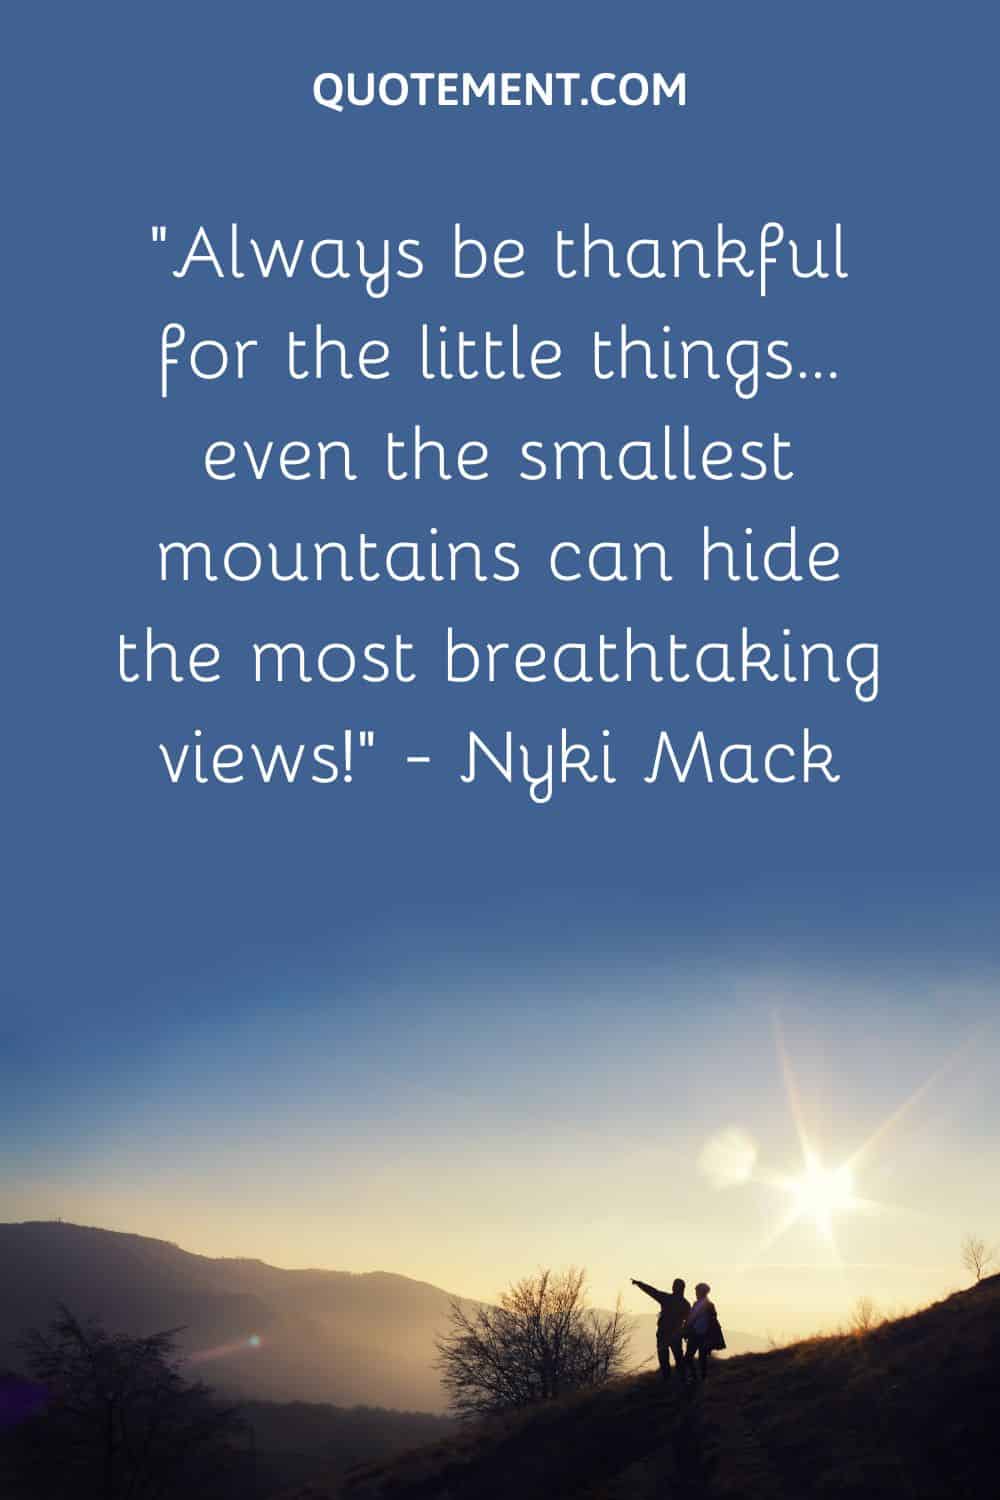 “Always be thankful for the little things… even the smallest mountains can hide the most breathtaking views!” — Nyki Mack